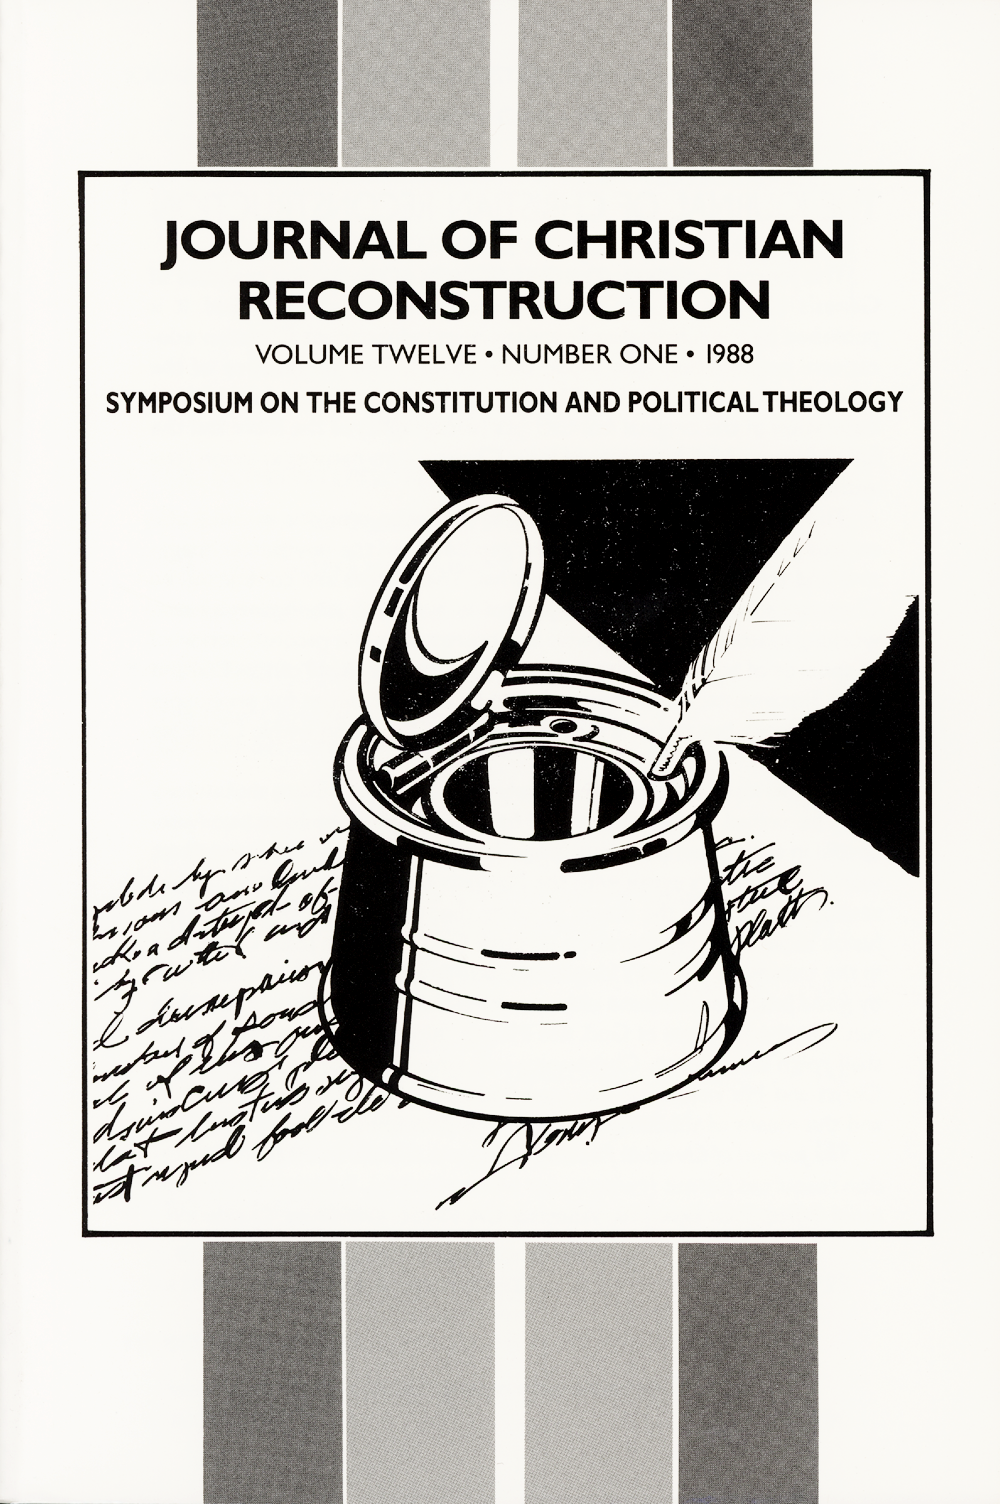 JCR Vol 12 No 1: Symposium on the Constitution and Political Theology